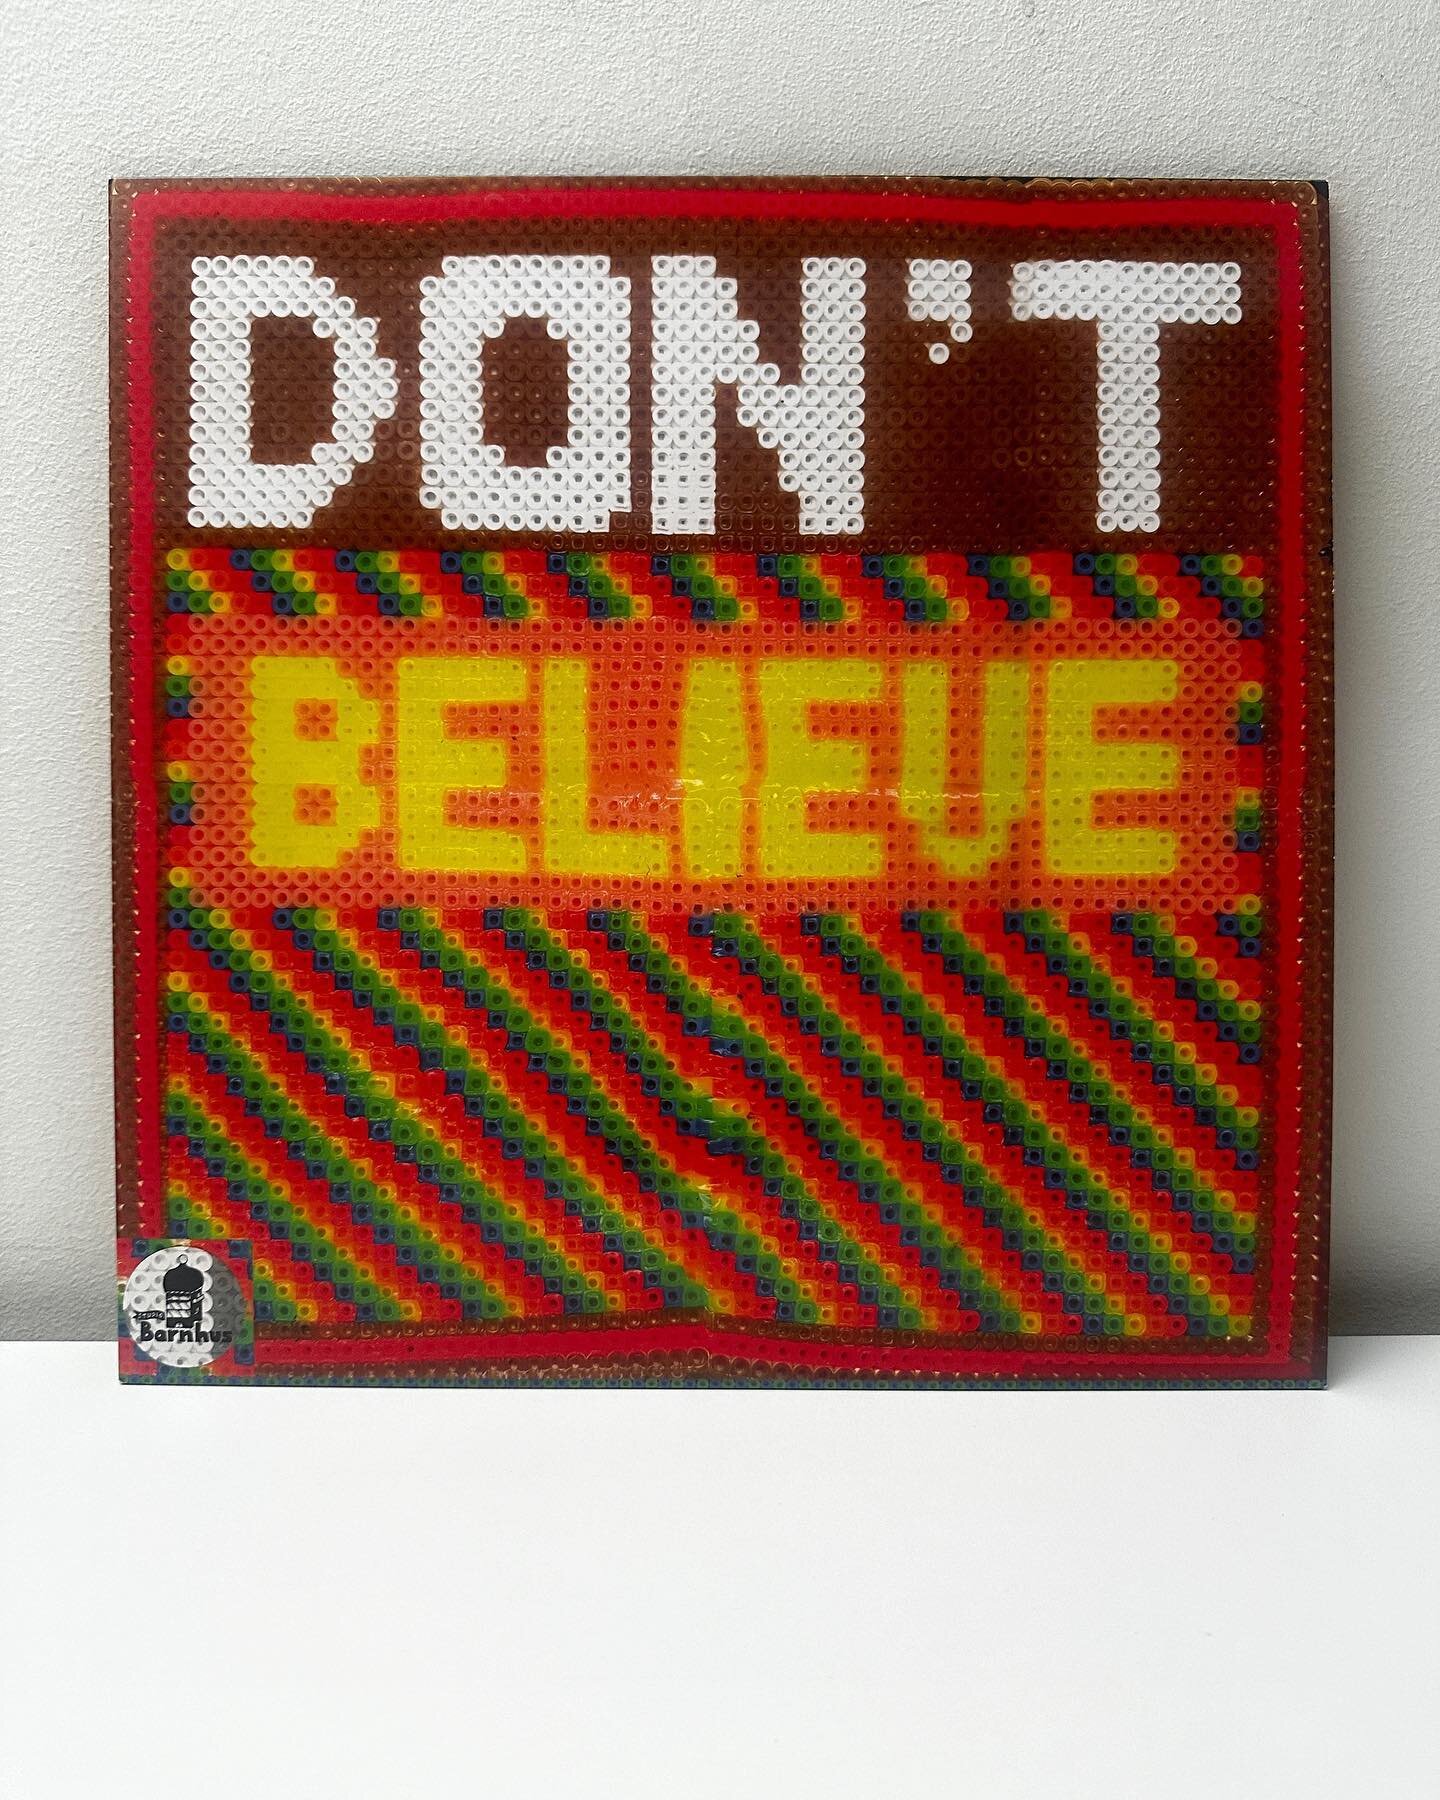 Henry Rodrick - Don&rsquo;t Believe turns 10 years today! Happy birthday to the greatest Swedish footwork record ever 💕 Written and produced by Henry Rodrick, artwork by @makode 🪄